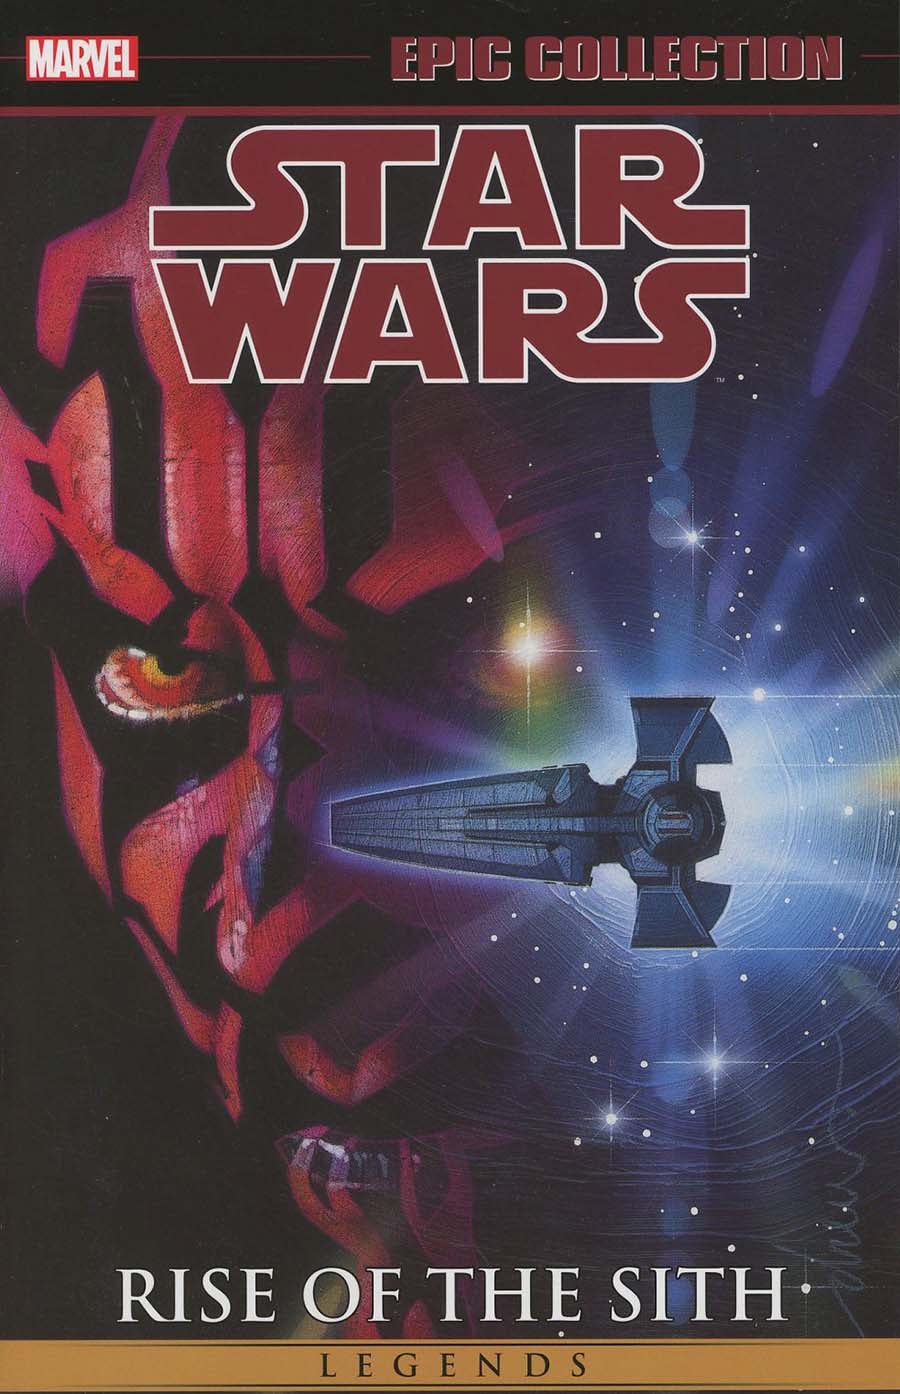 Star Wars Legends Epic Collection Rise Of The Sith Vol 2 TP